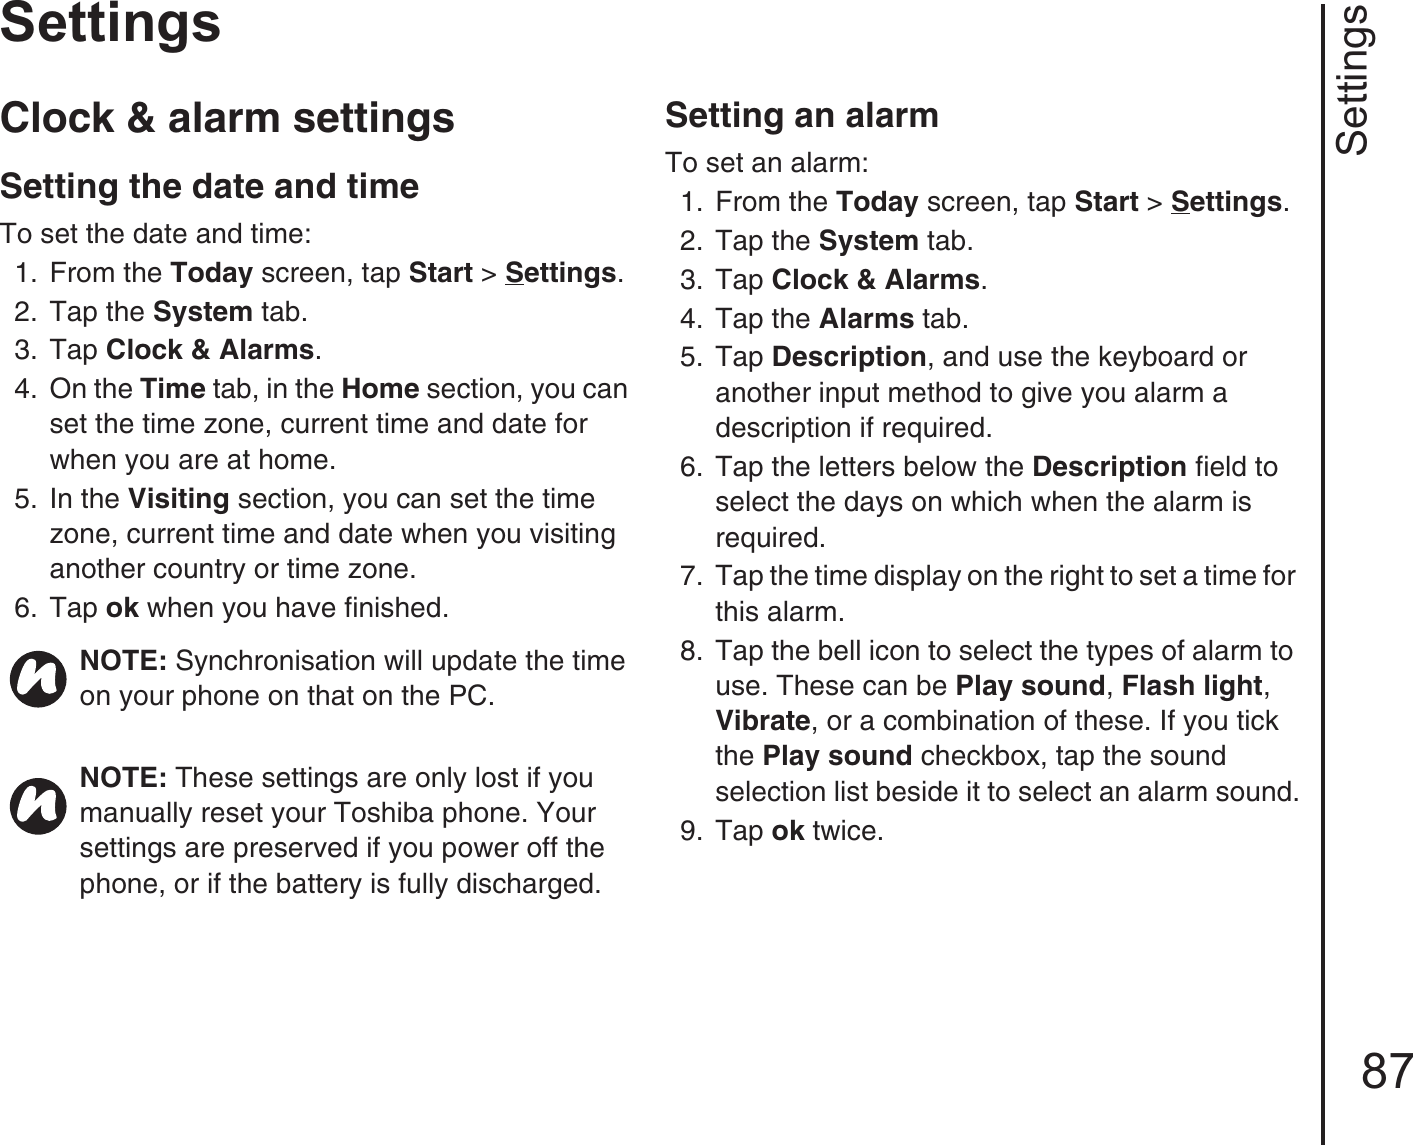 Settings87SettingsClock &amp; alarm settingsSetting the date and time To set the date and time:1.  From the Today screen, tap Start &gt; Settings.2.  Tap the System tab.3.  Tap Clock &amp; Alarms. 4.  On the Time tab, in the Home section, you can set the time zone, current time and date for when you are at home.5.  In the Visiting section, you can set the time zone, current time and date when you visiting another country or time zone.6.  Tap ok when you have finished.Setting an alarmTo set an alarm:1.  From the Today screen, tap Start &gt; Settings.2.  Tap the System tab.3.  Tap Clock &amp; Alarms. 4.  Tap the Alarms tab. 5.  Tap Description, and use the keyboard or another input method to give you alarm a description if required.6.  Tap the letters below the Description field to select the days on which when the alarm is required.7.  Tap the time display on the right to set a time for this alarm.8.  Tap the bell icon to select the types of alarm to use. These can be Play sound, Flash light, Vibrate, or a combination of these. If you tick the Play sound checkbox, tap the sound selection list beside it to select an alarm sound.9.  Tap ok twice.NOTE: Synchronisation will update the time on your phone on that on the PC.NOTE: These settings are only lost if you manually reset your Toshiba phone. Your settings are preserved if you power off the phone, or if the battery is fully discharged.